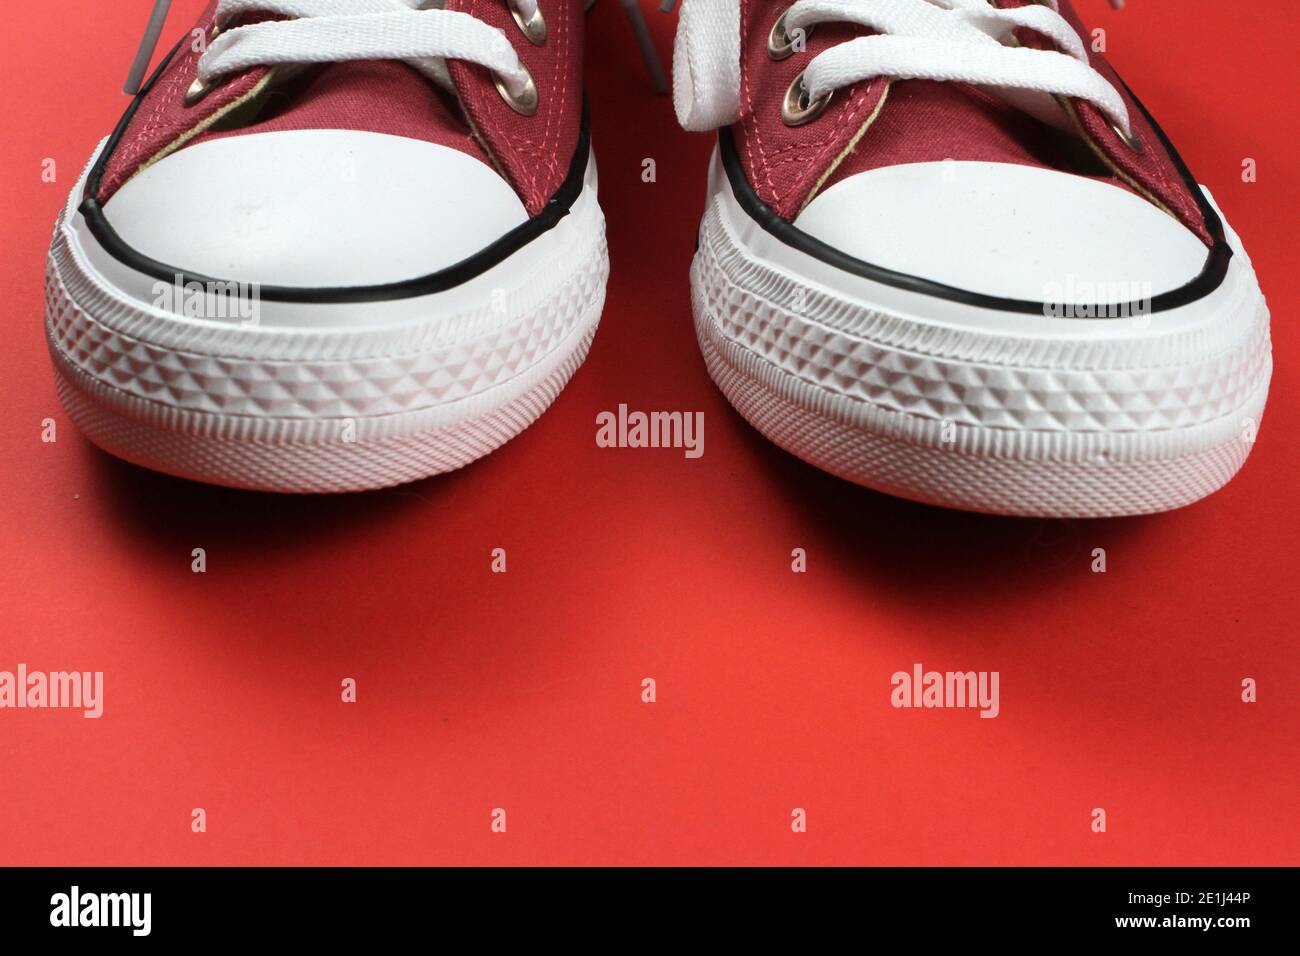 A pair of red pink sneakers with white laces against a stark red background. Stock Photo